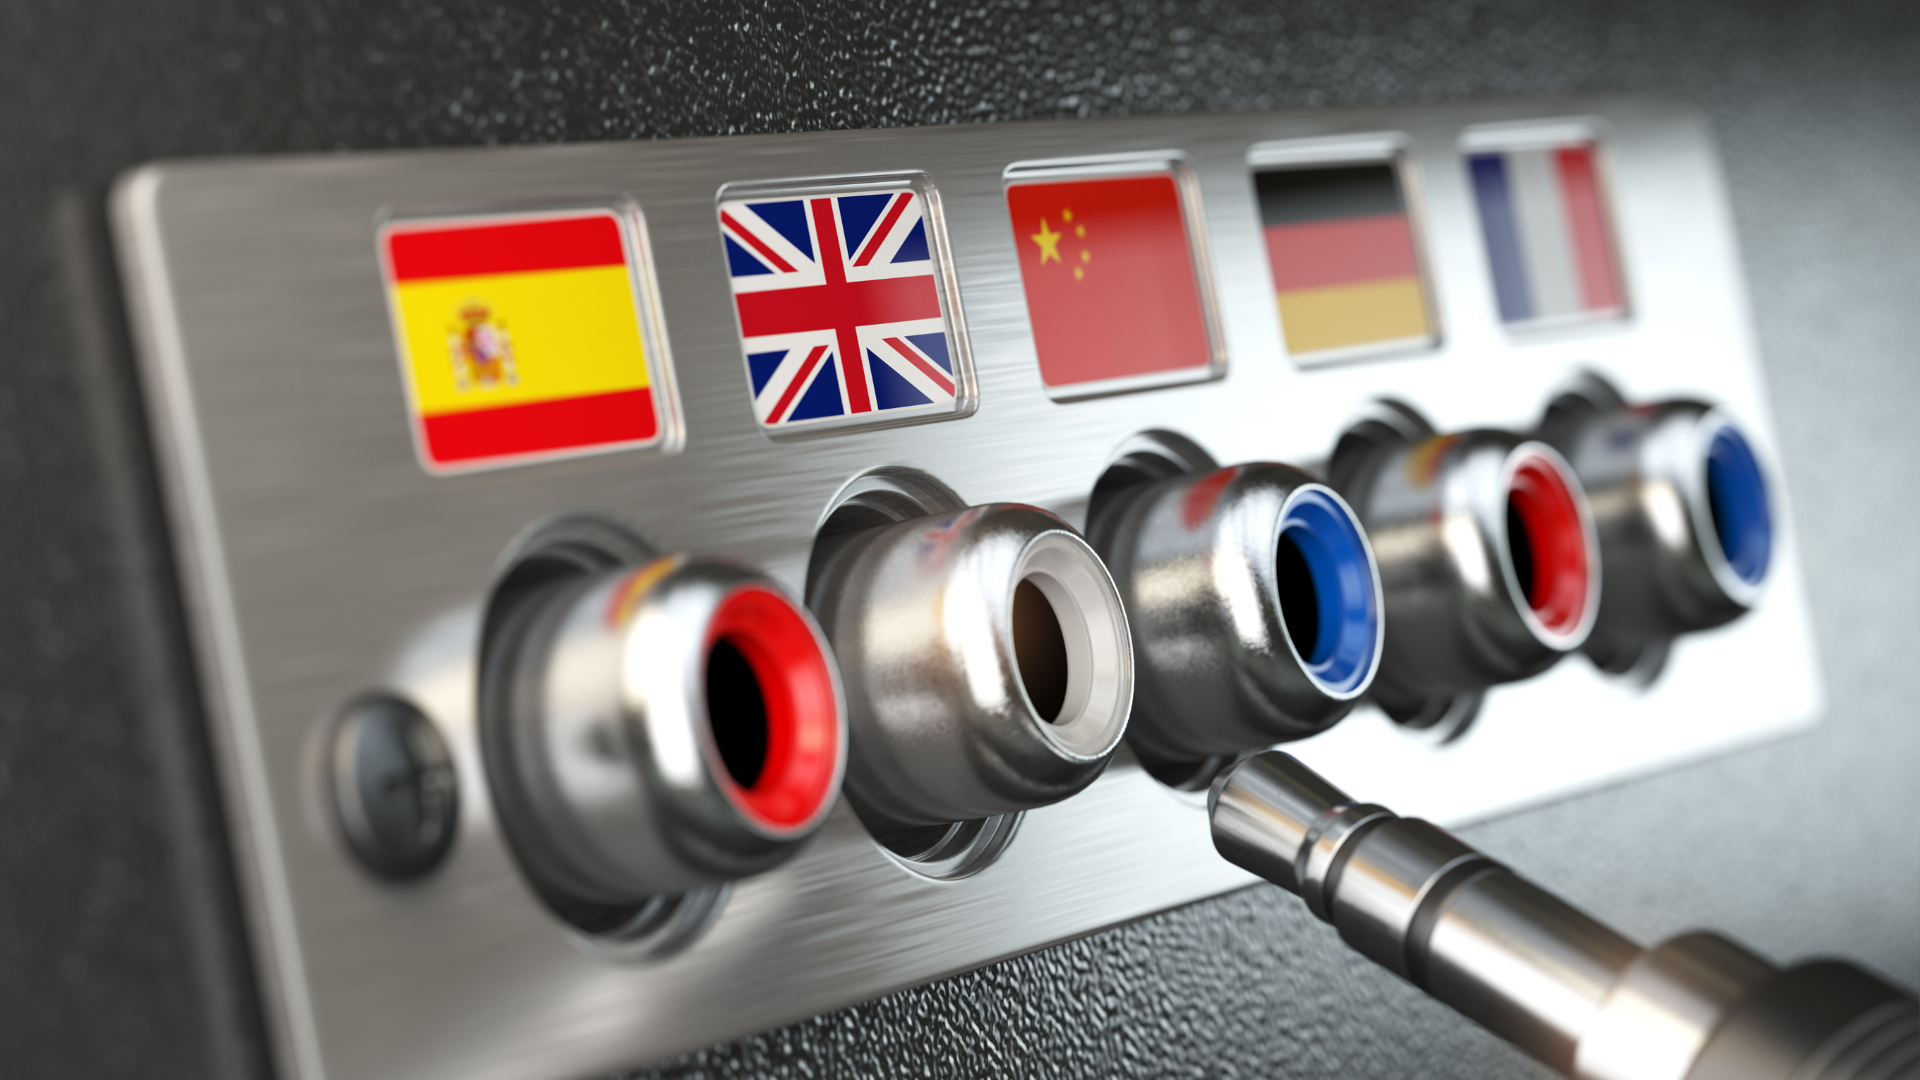 An aux cord plugs into jacks with flags of different languages represented